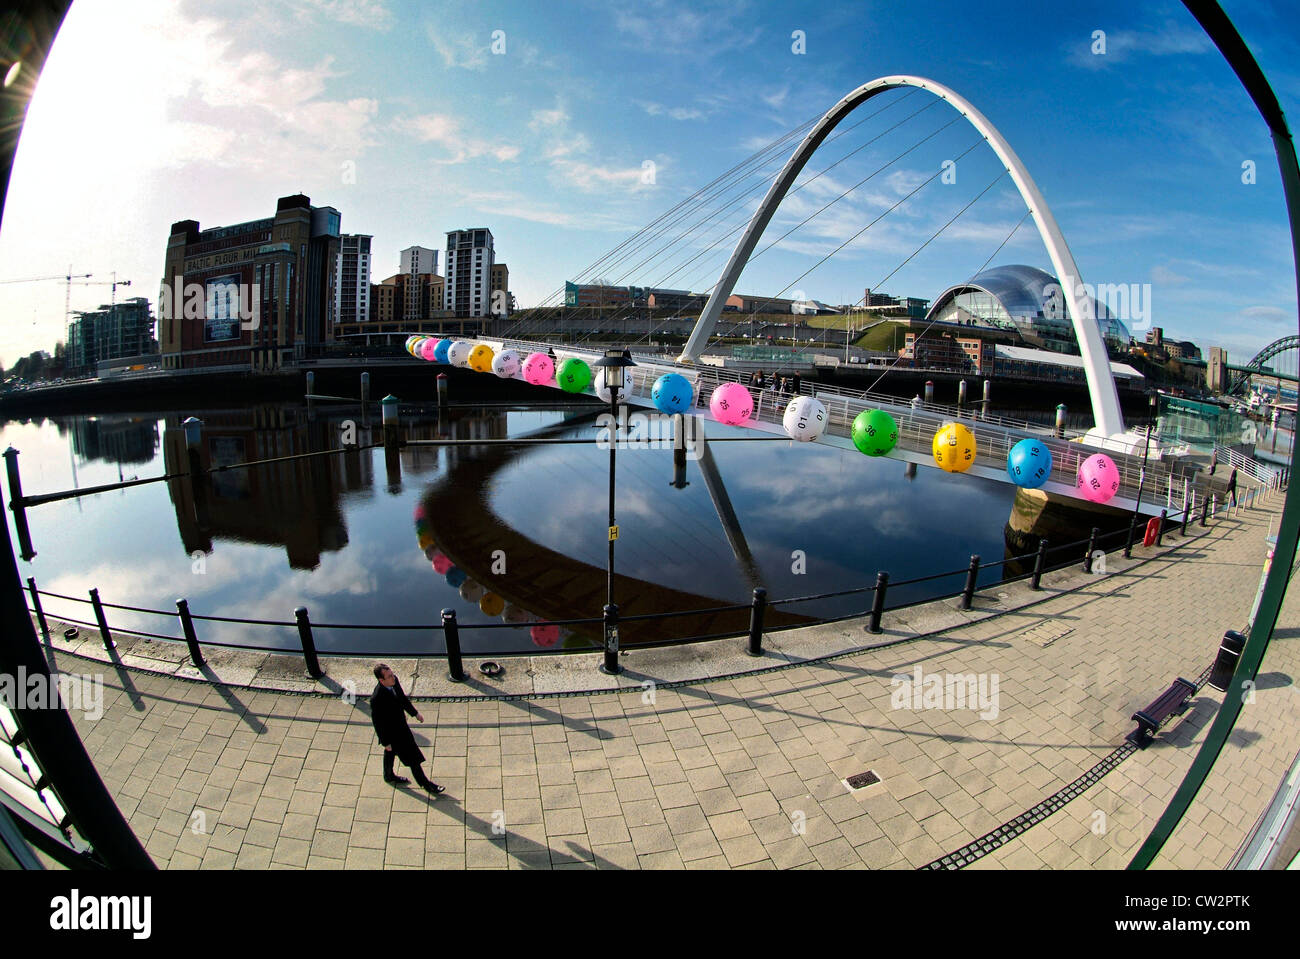 Newcastle upon Tyne, Tyne and Wear.  The Gateshead Millenium Bridge, Baltic Art Gallery, and Sage Arts Centre. National Lottery. Stock Photo